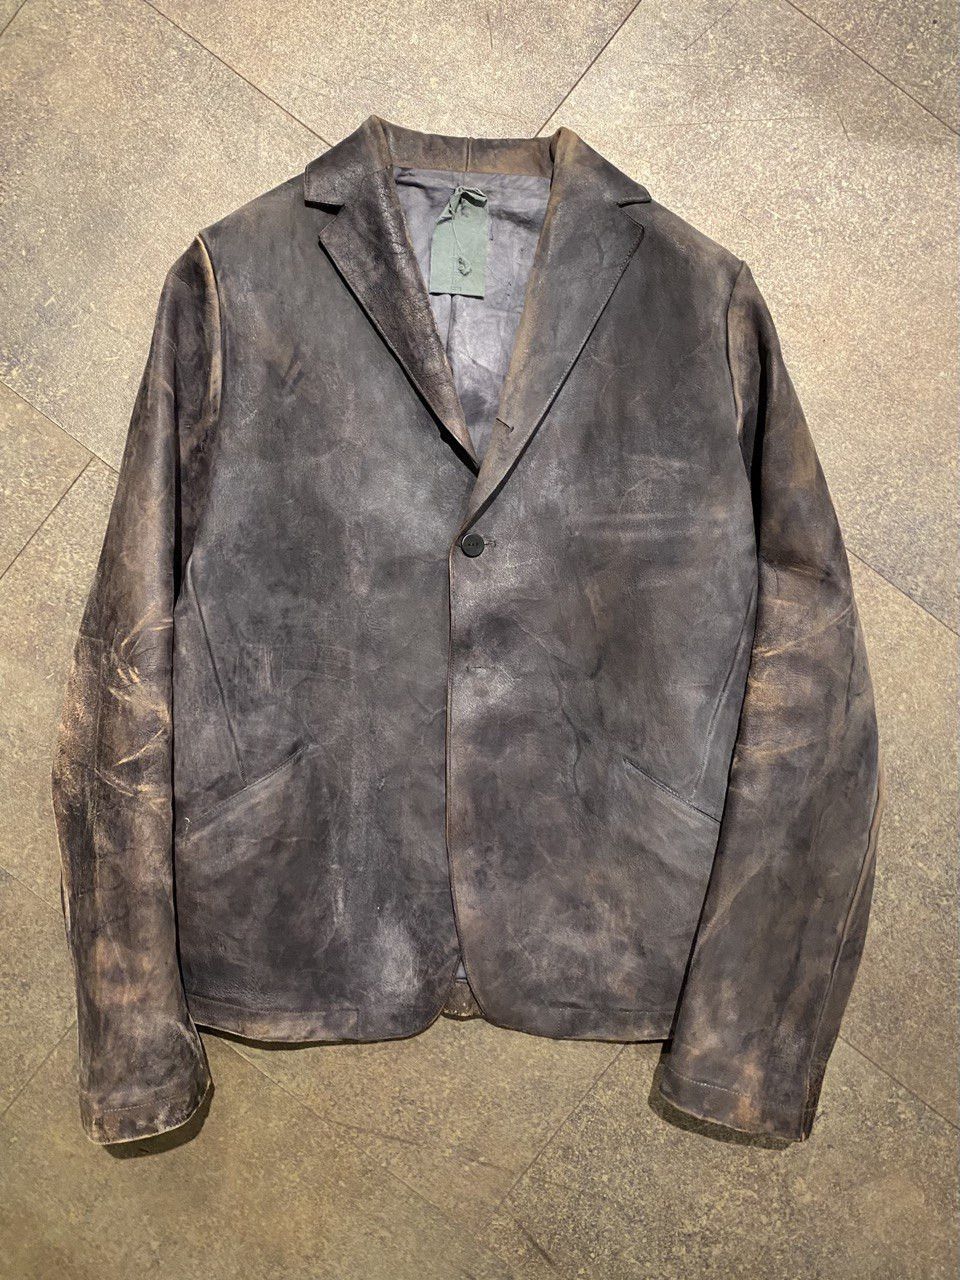 A1923 Brown And Gray Tight Leather Jacket | Grailed